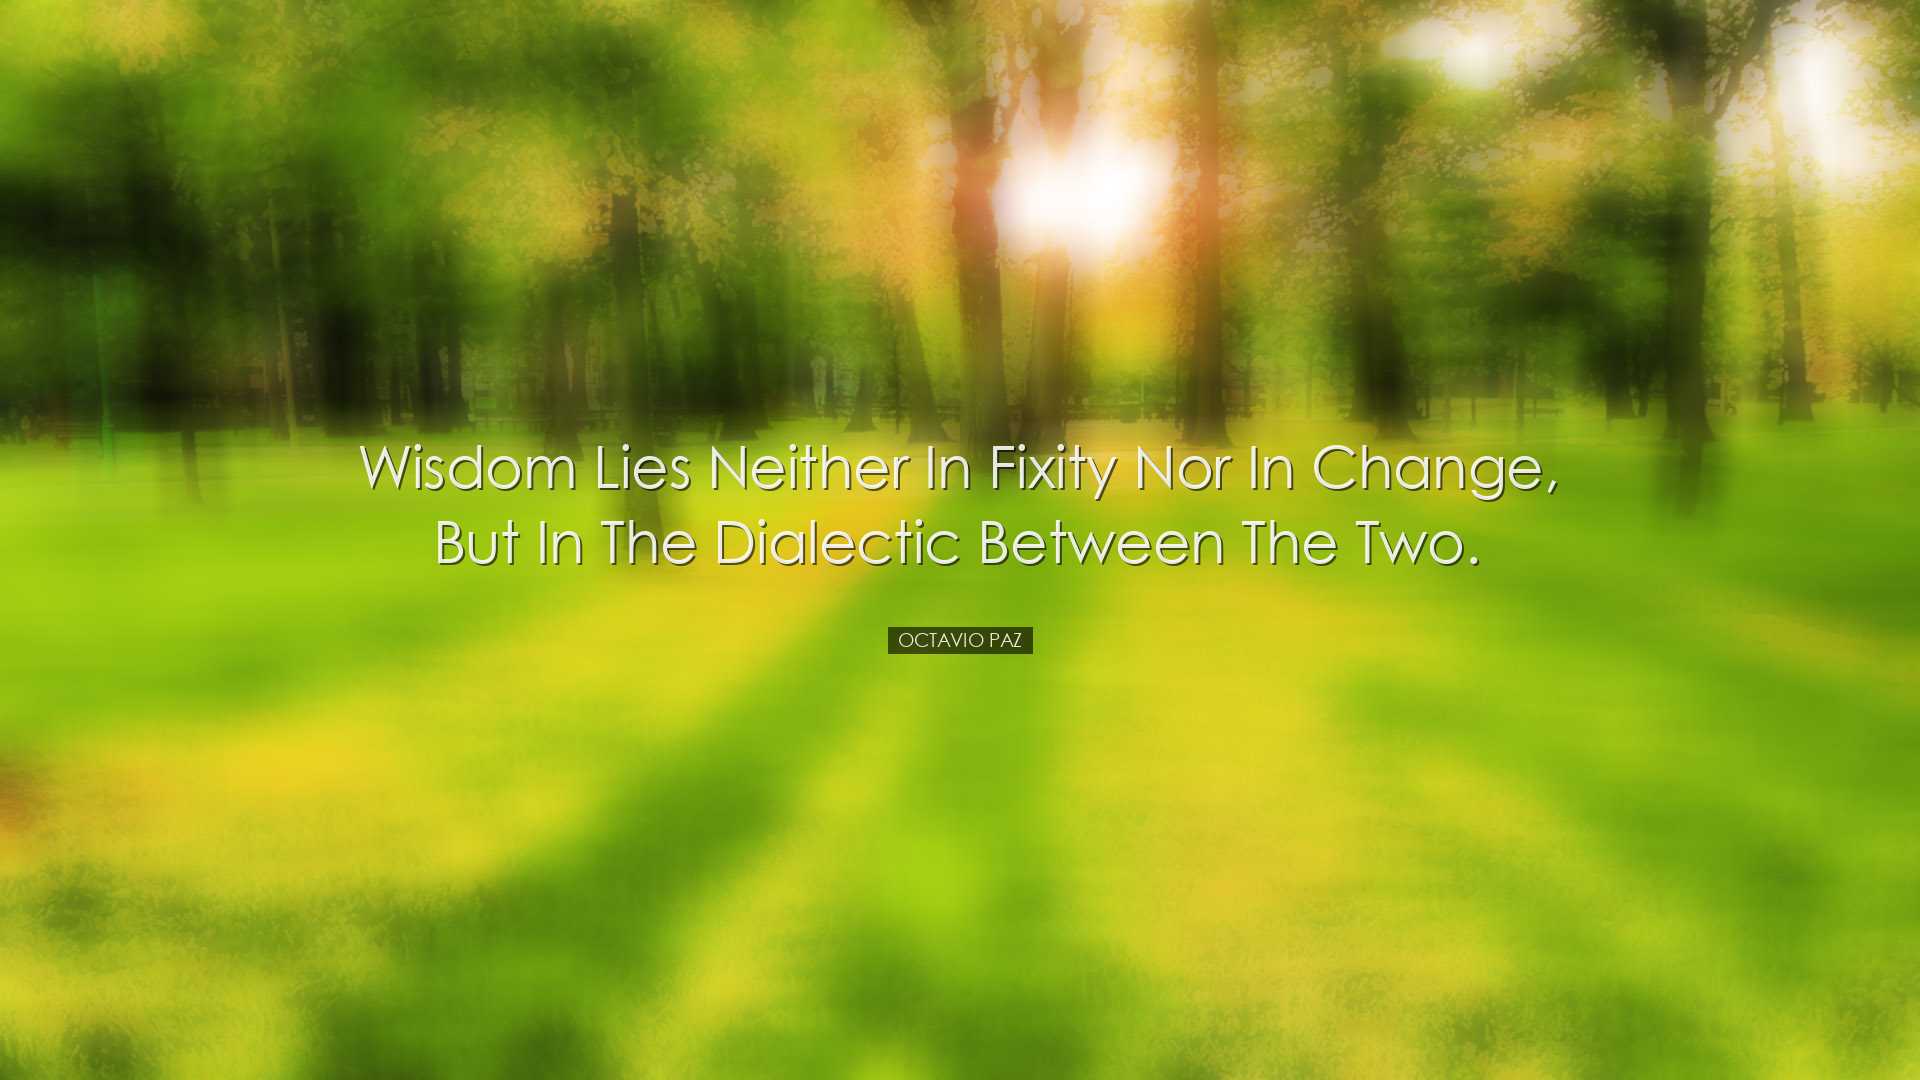 Wisdom lies neither in fixity nor in change, but in the dialectic